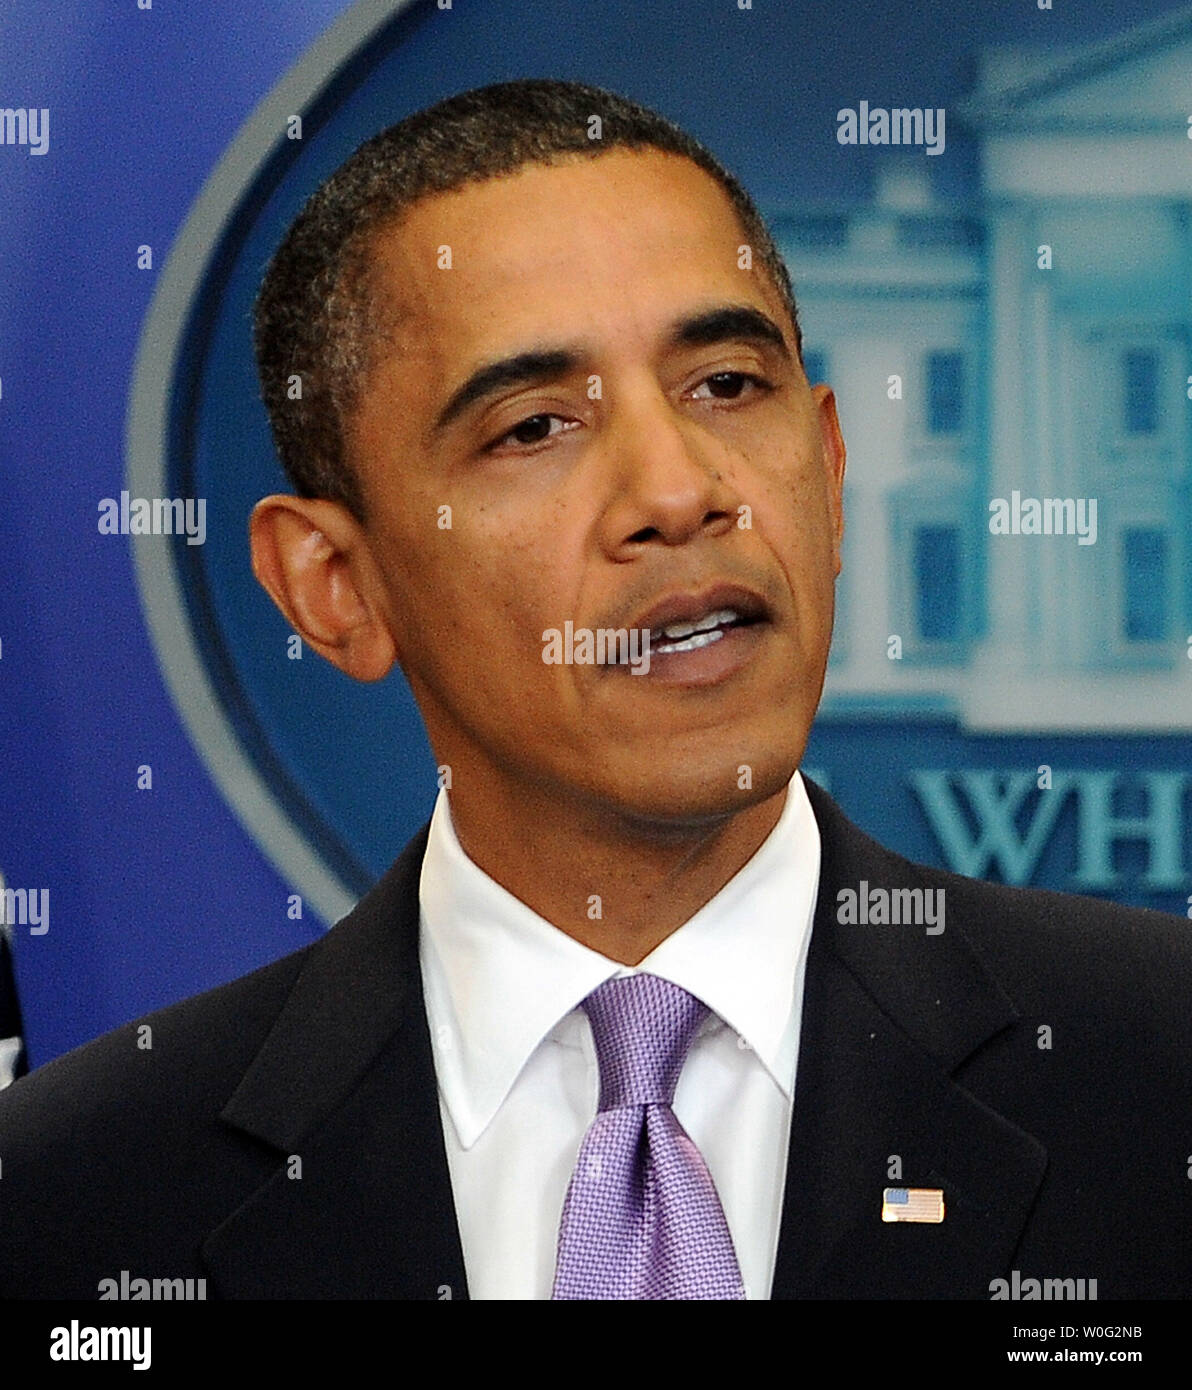 U.S. President Barack Obama makes a statement regarding bomb material found on cargo planes in the Brady Press Briefing Room of the White House in Washington on October 29, 2010.       UPI/Roger L. Wollenberg Stock Photo